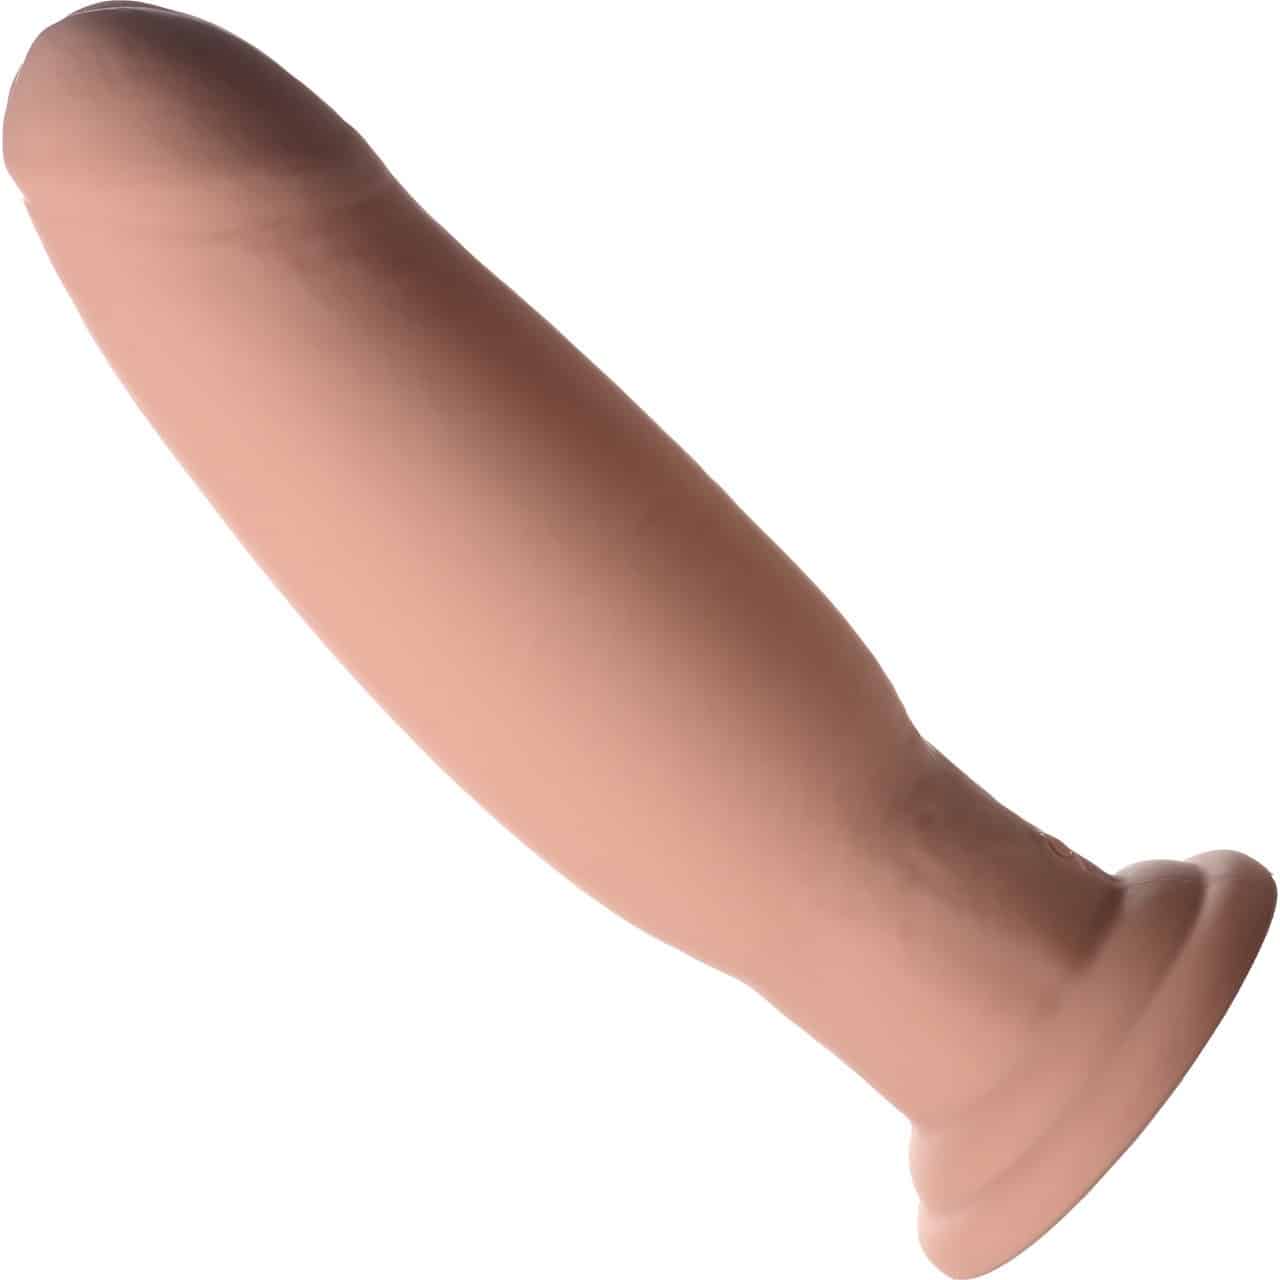 Swell Inflatable Vibrating Realistic Dildo. Slide 2